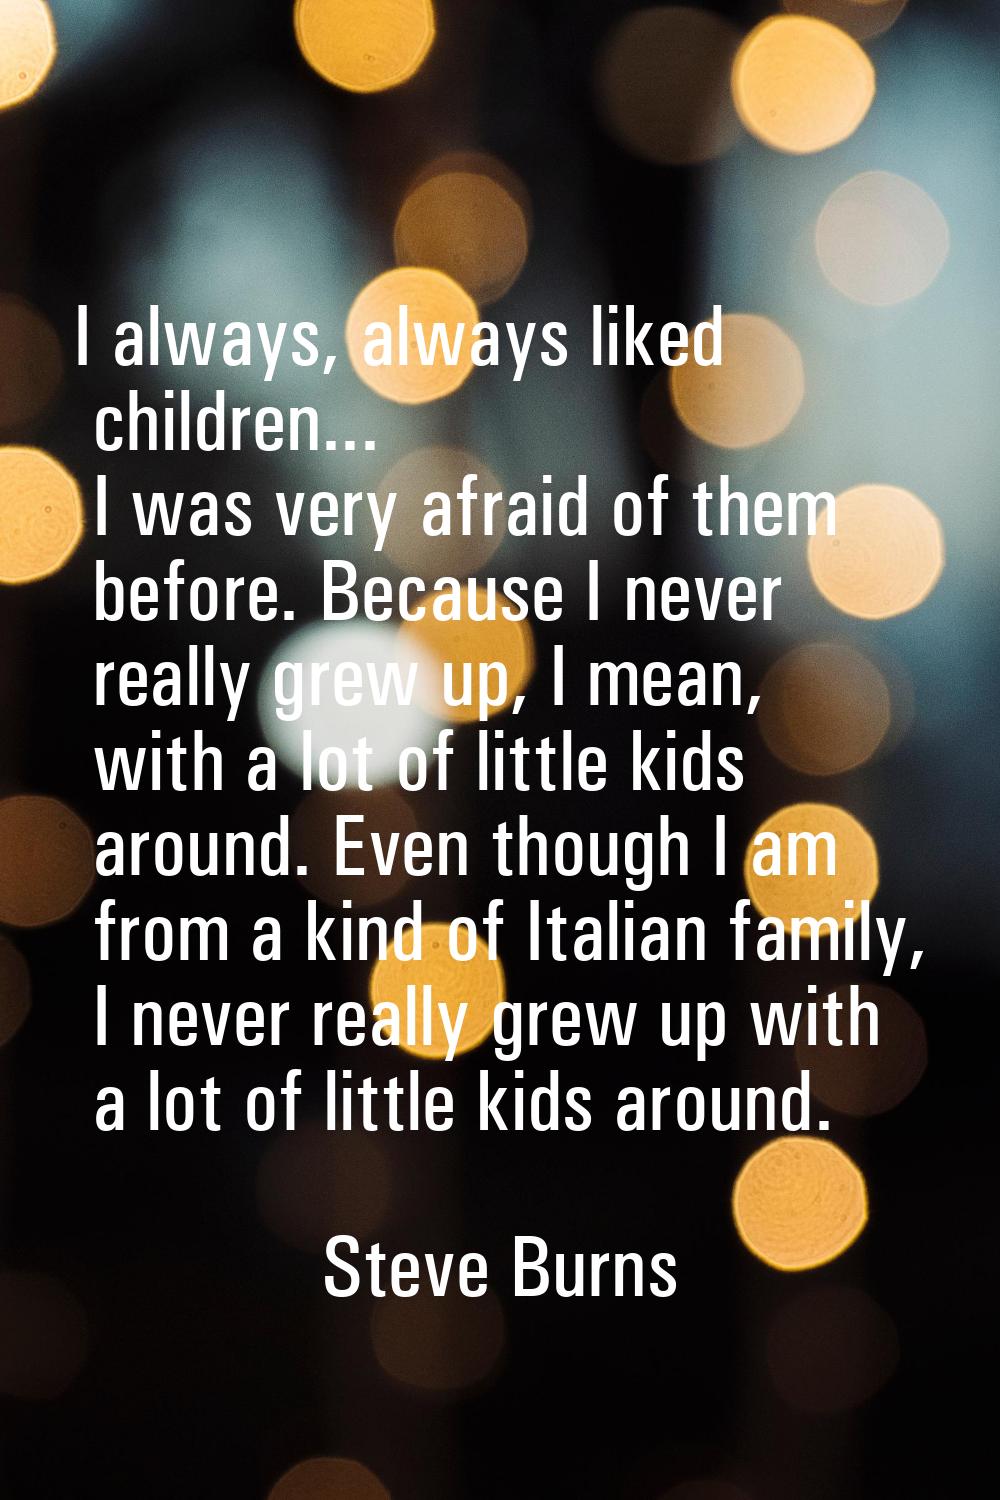 I always, always liked children... I was very afraid of them before. Because I never really grew up